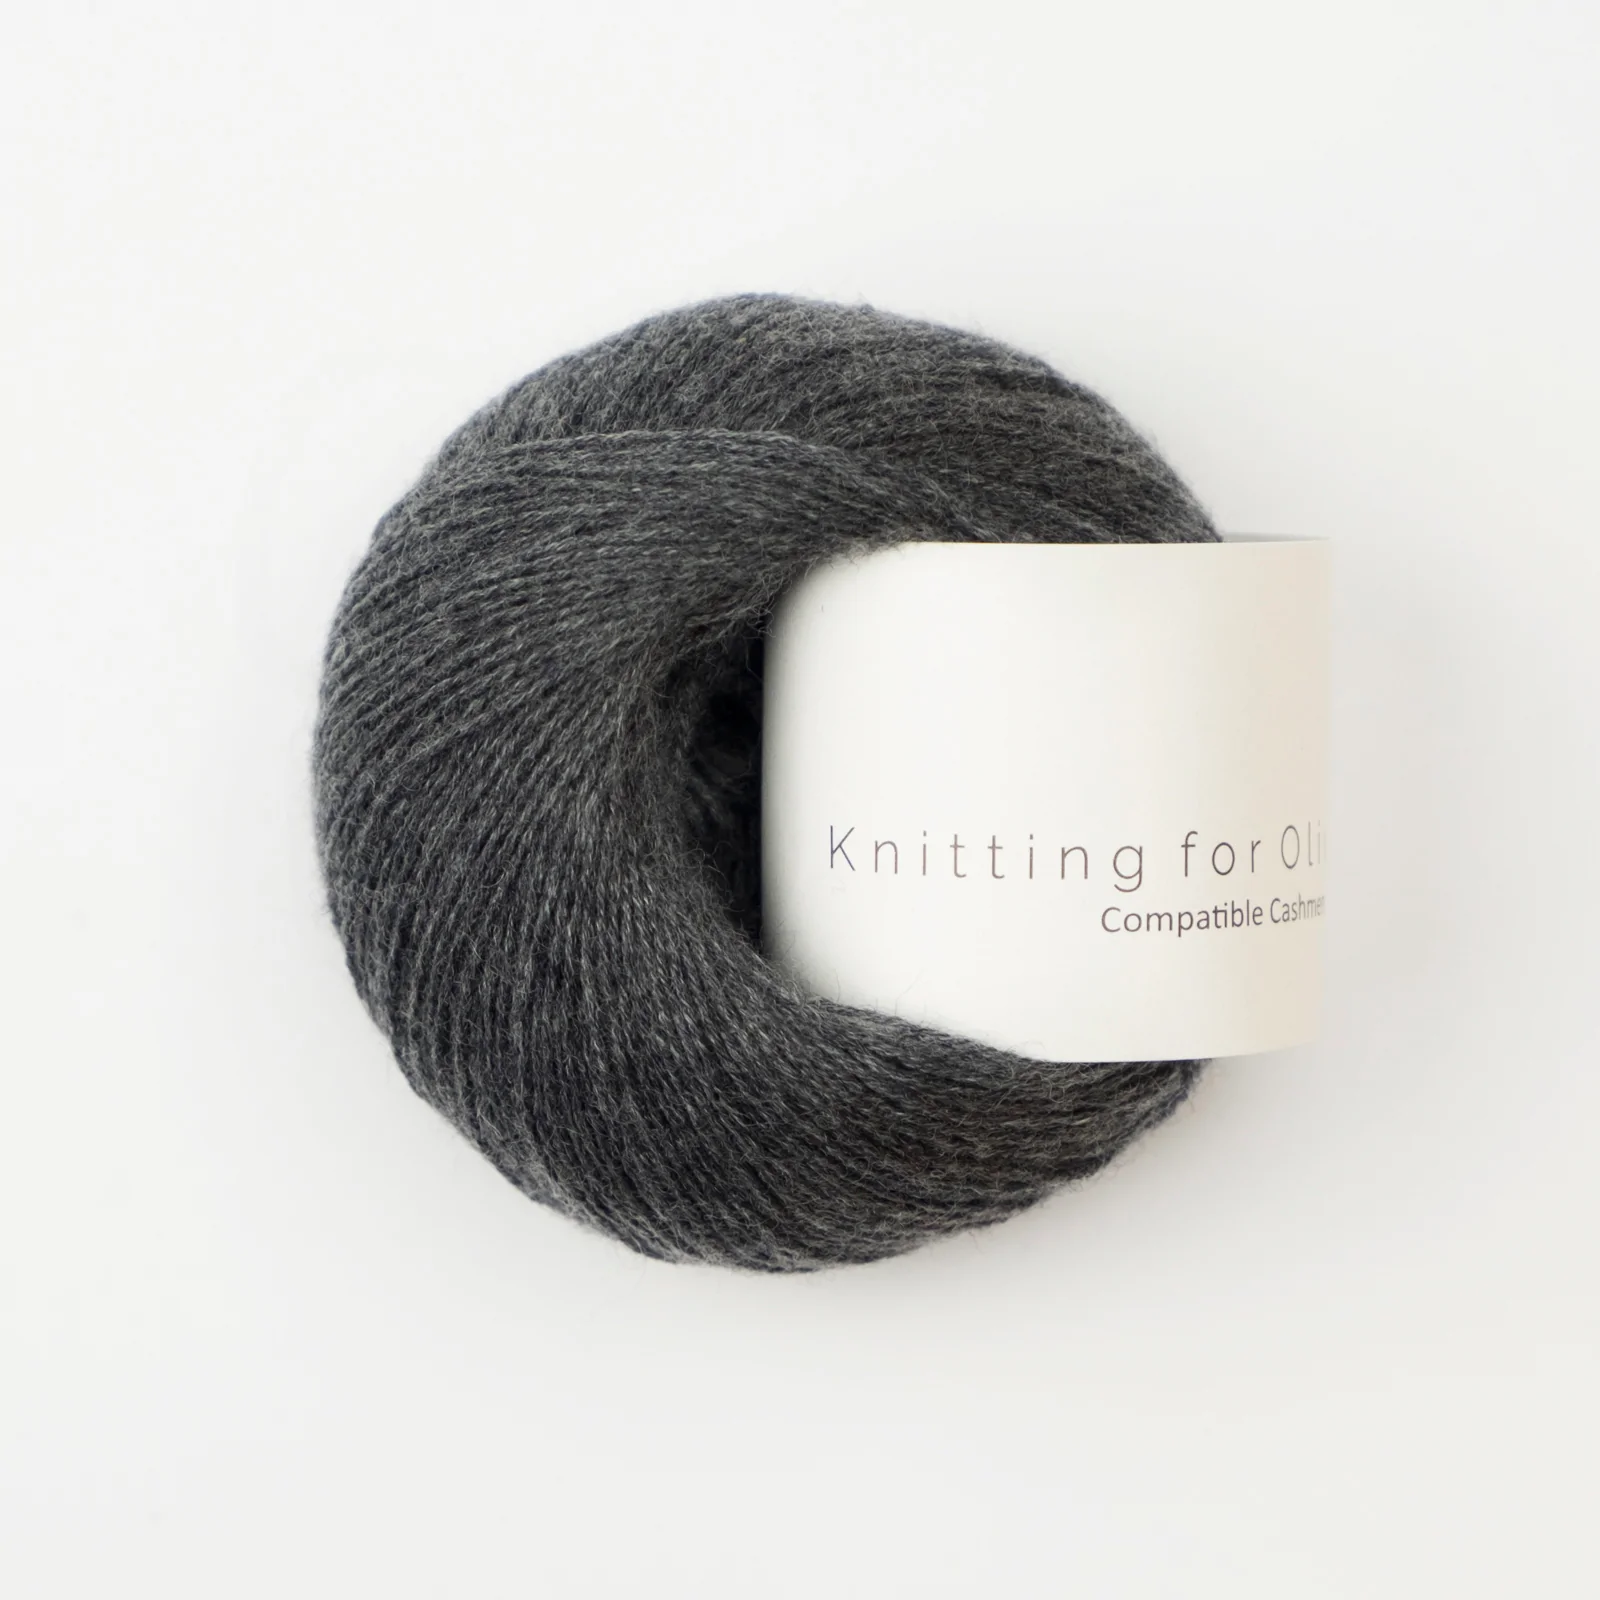 compatible cashmere knitting for olive | compatible cashmere: slate gray